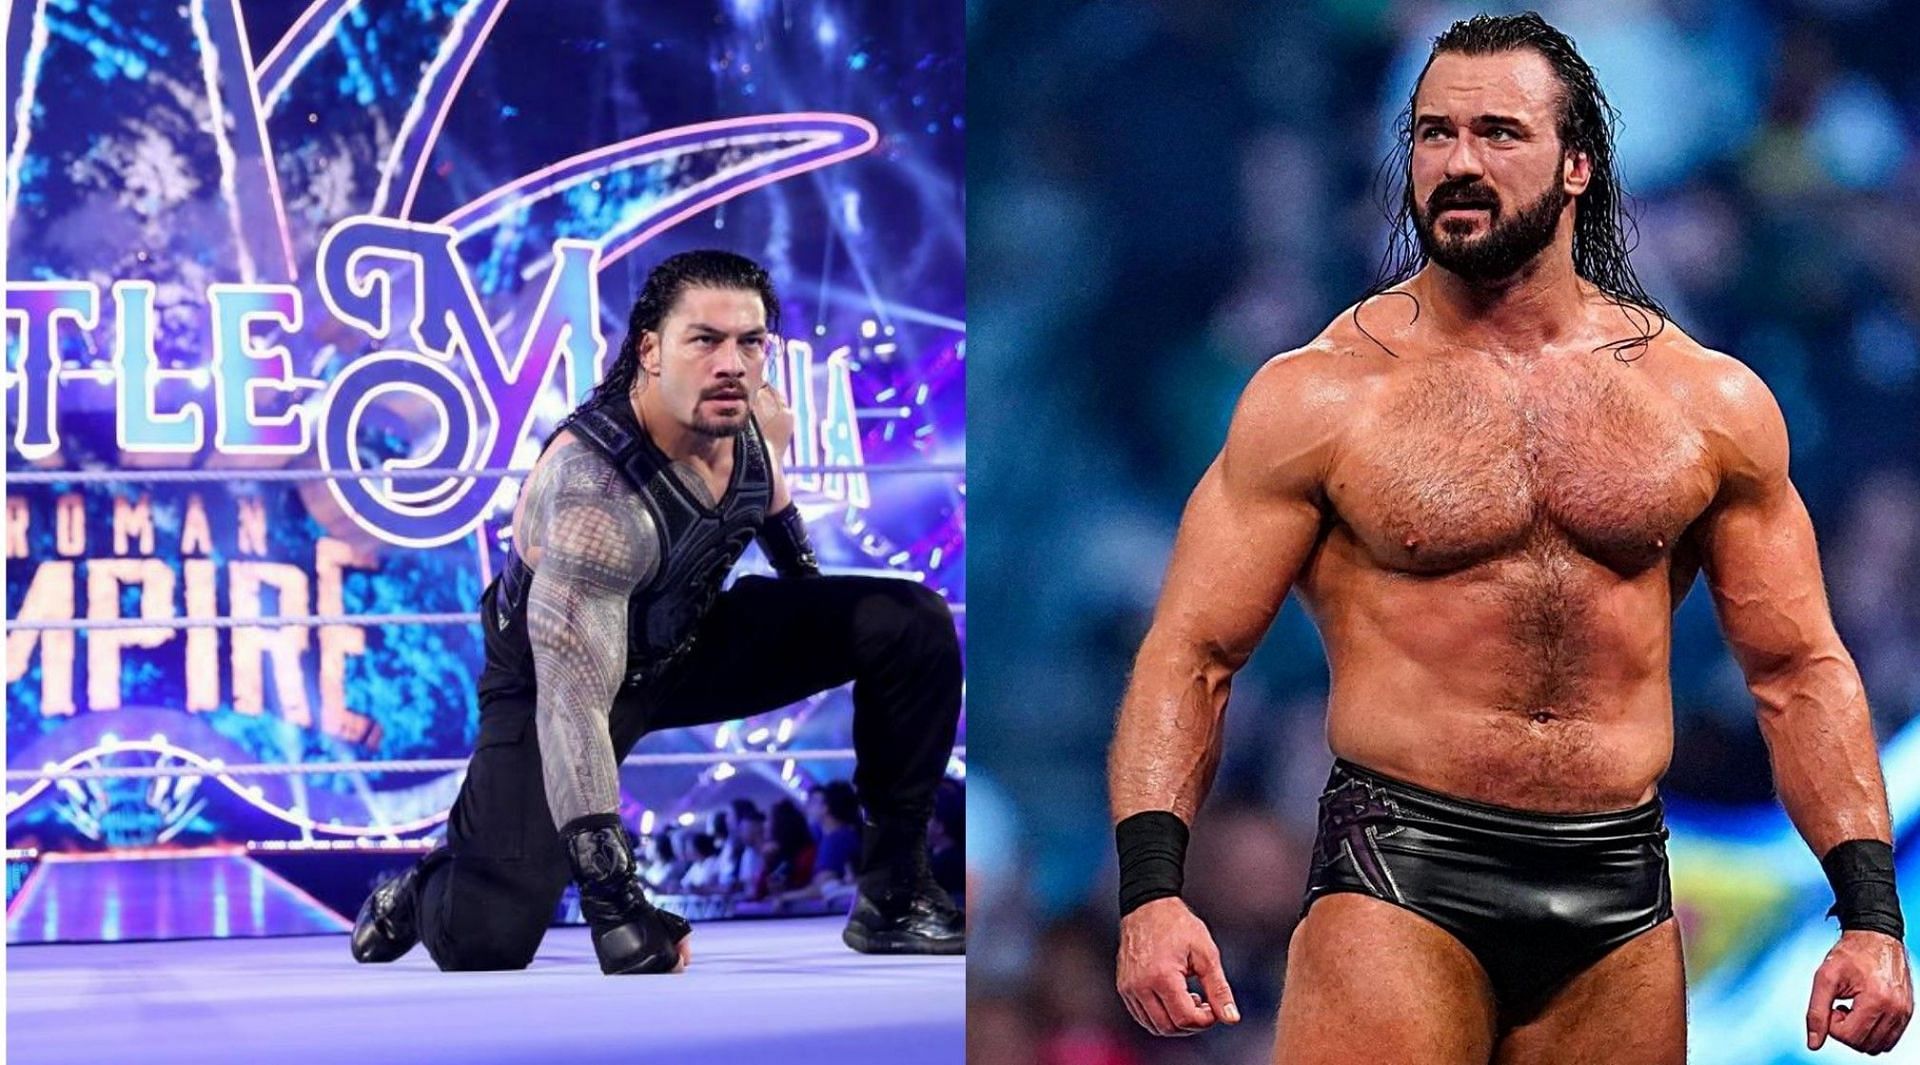 Roman Reigns (left) and Drew McIntyre (right)